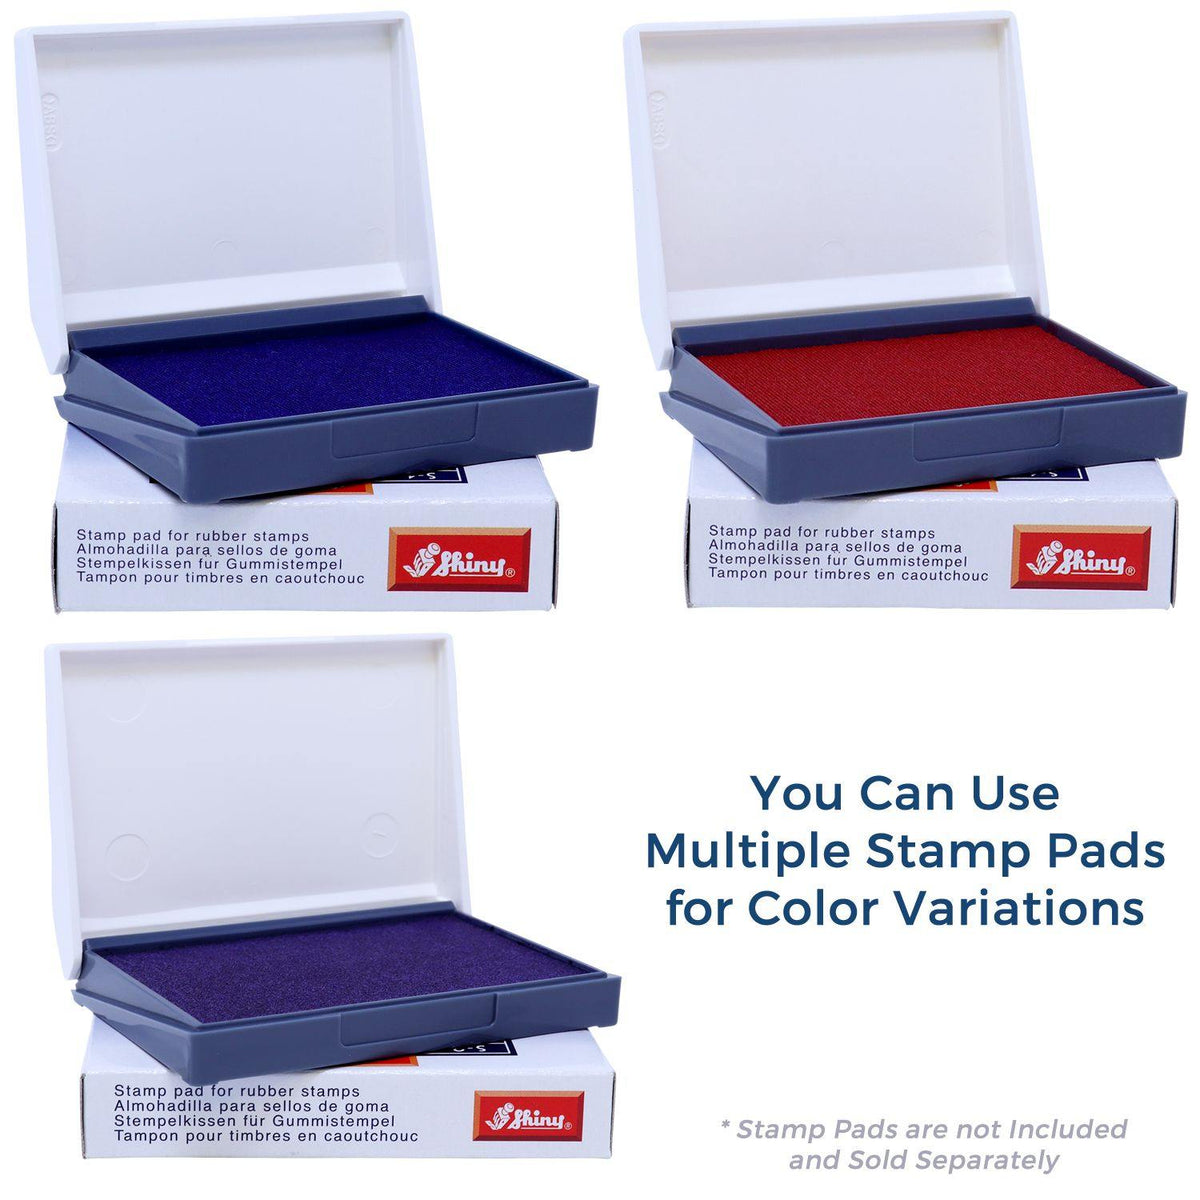 Stamp Pads for Fyi Rubber Stamp Available